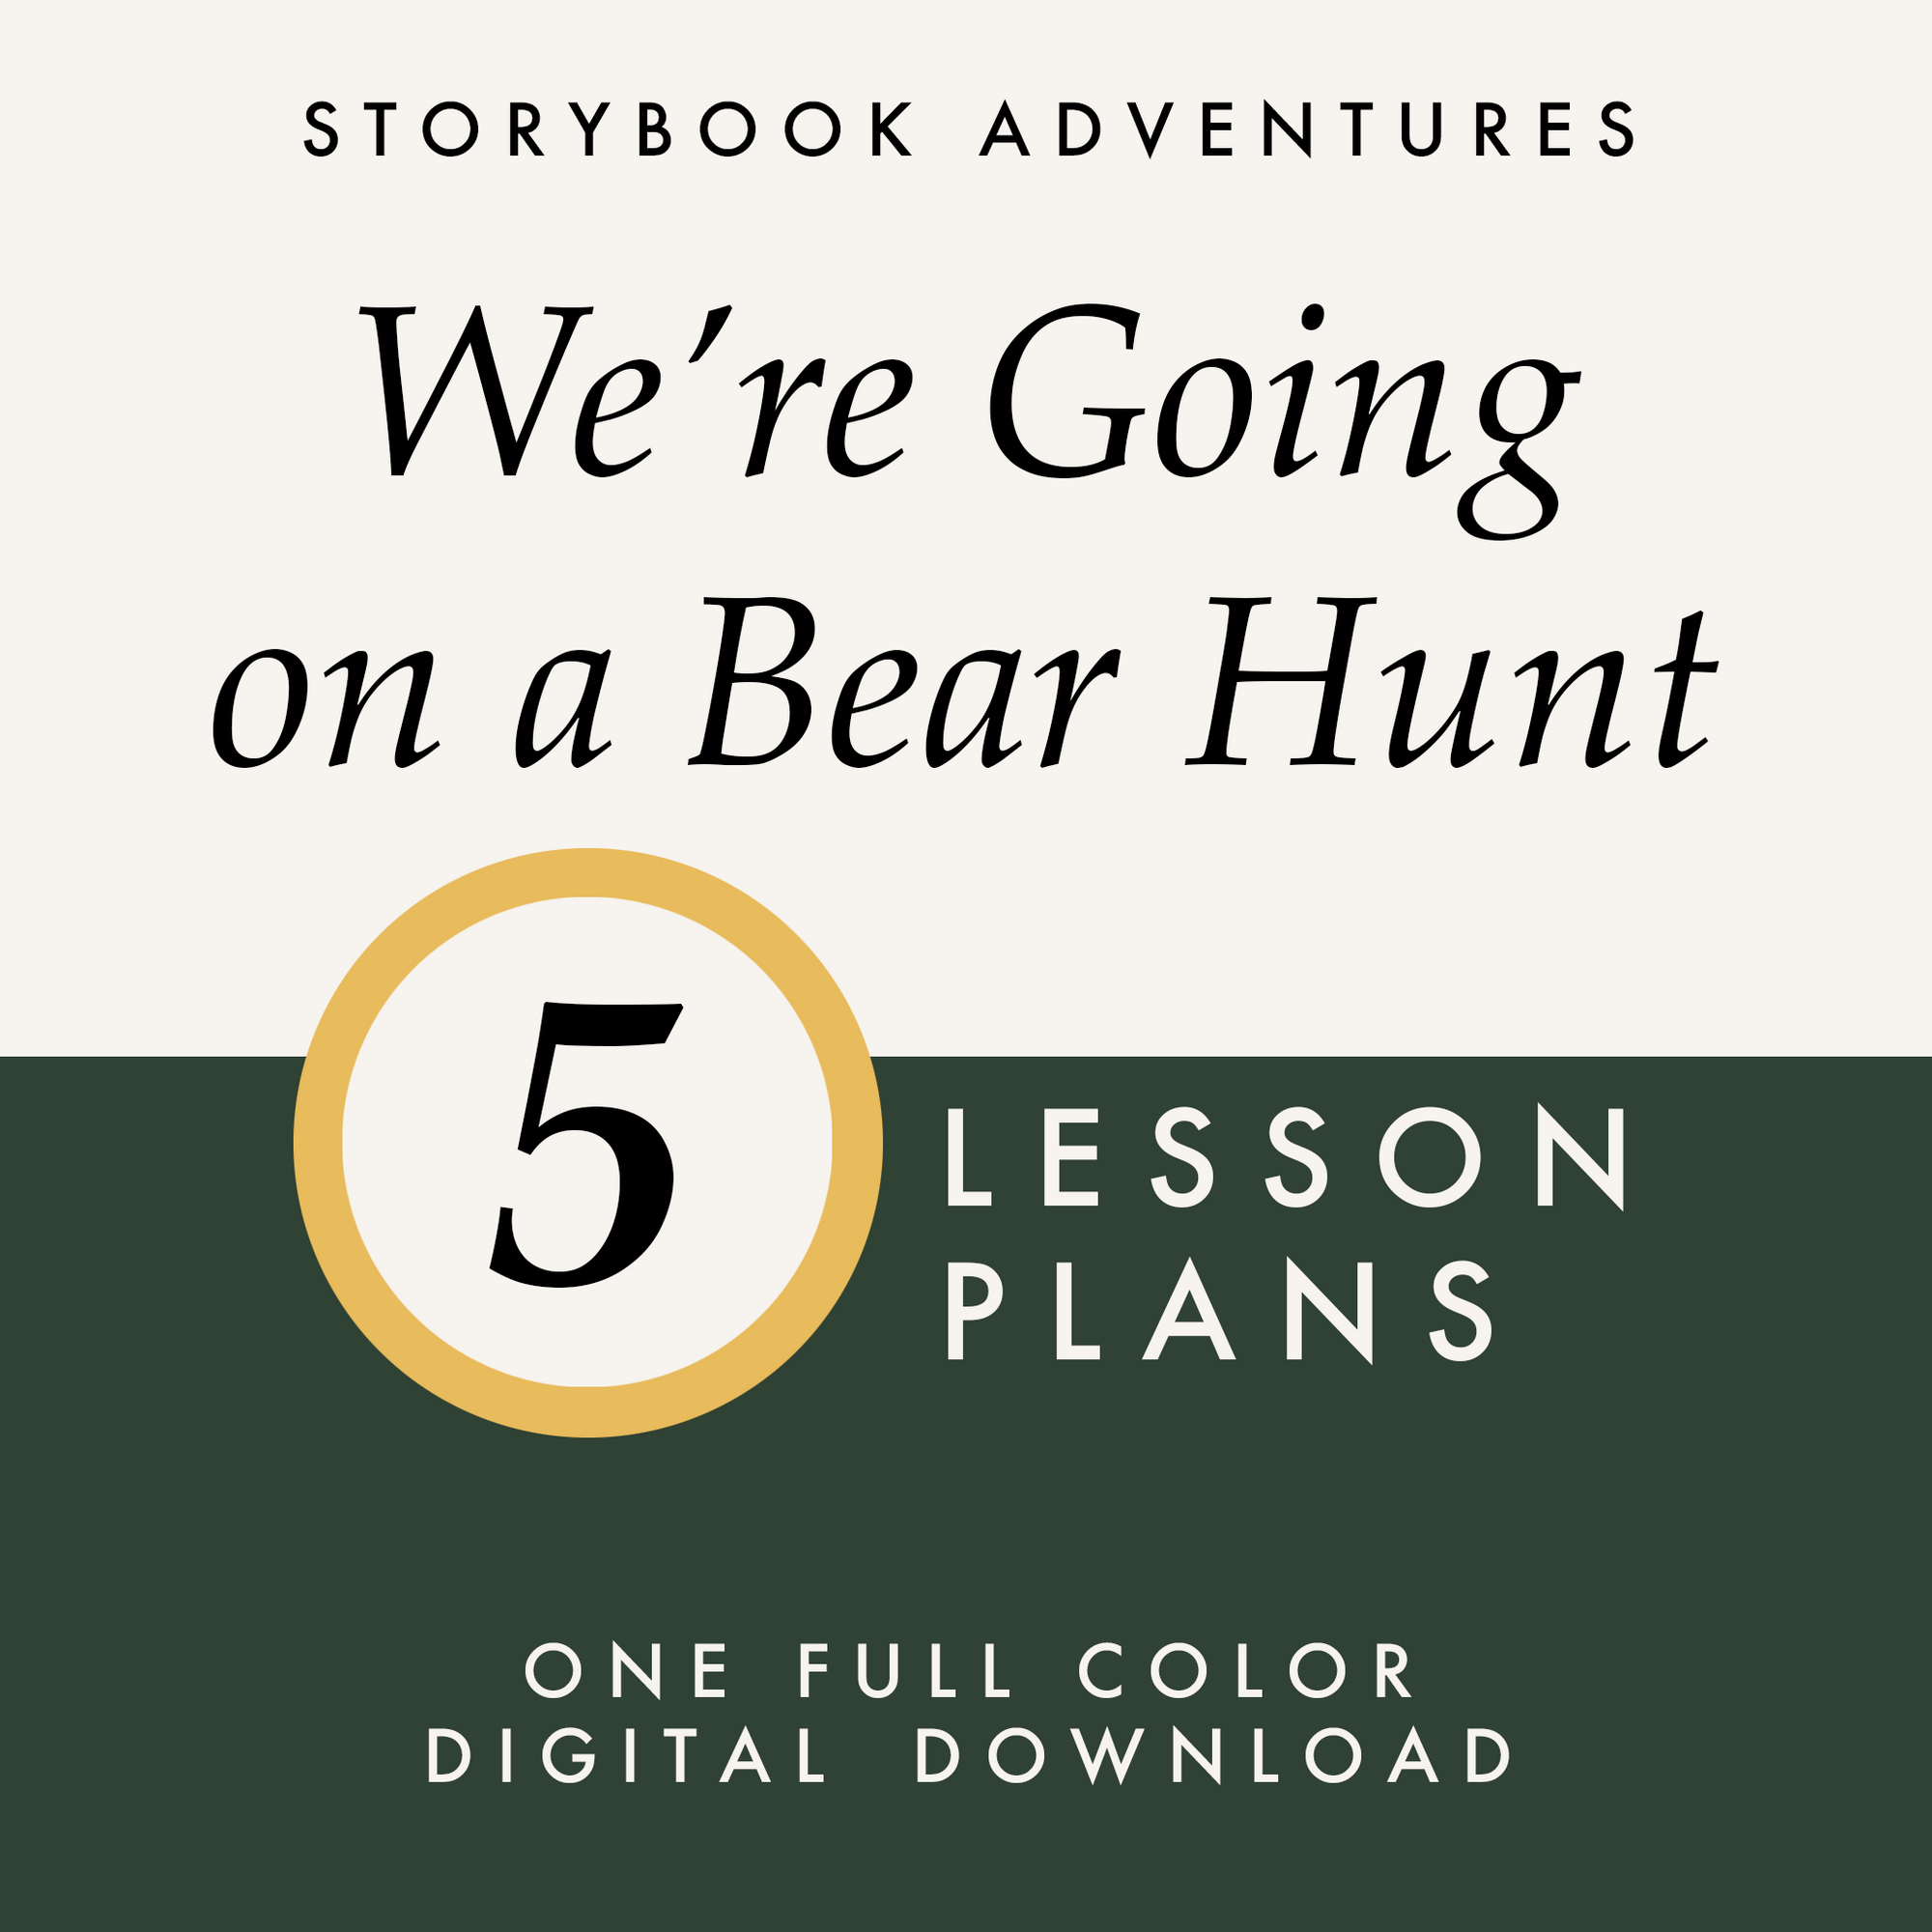 Storybook Adventures: We're Going on a Bear Hunt